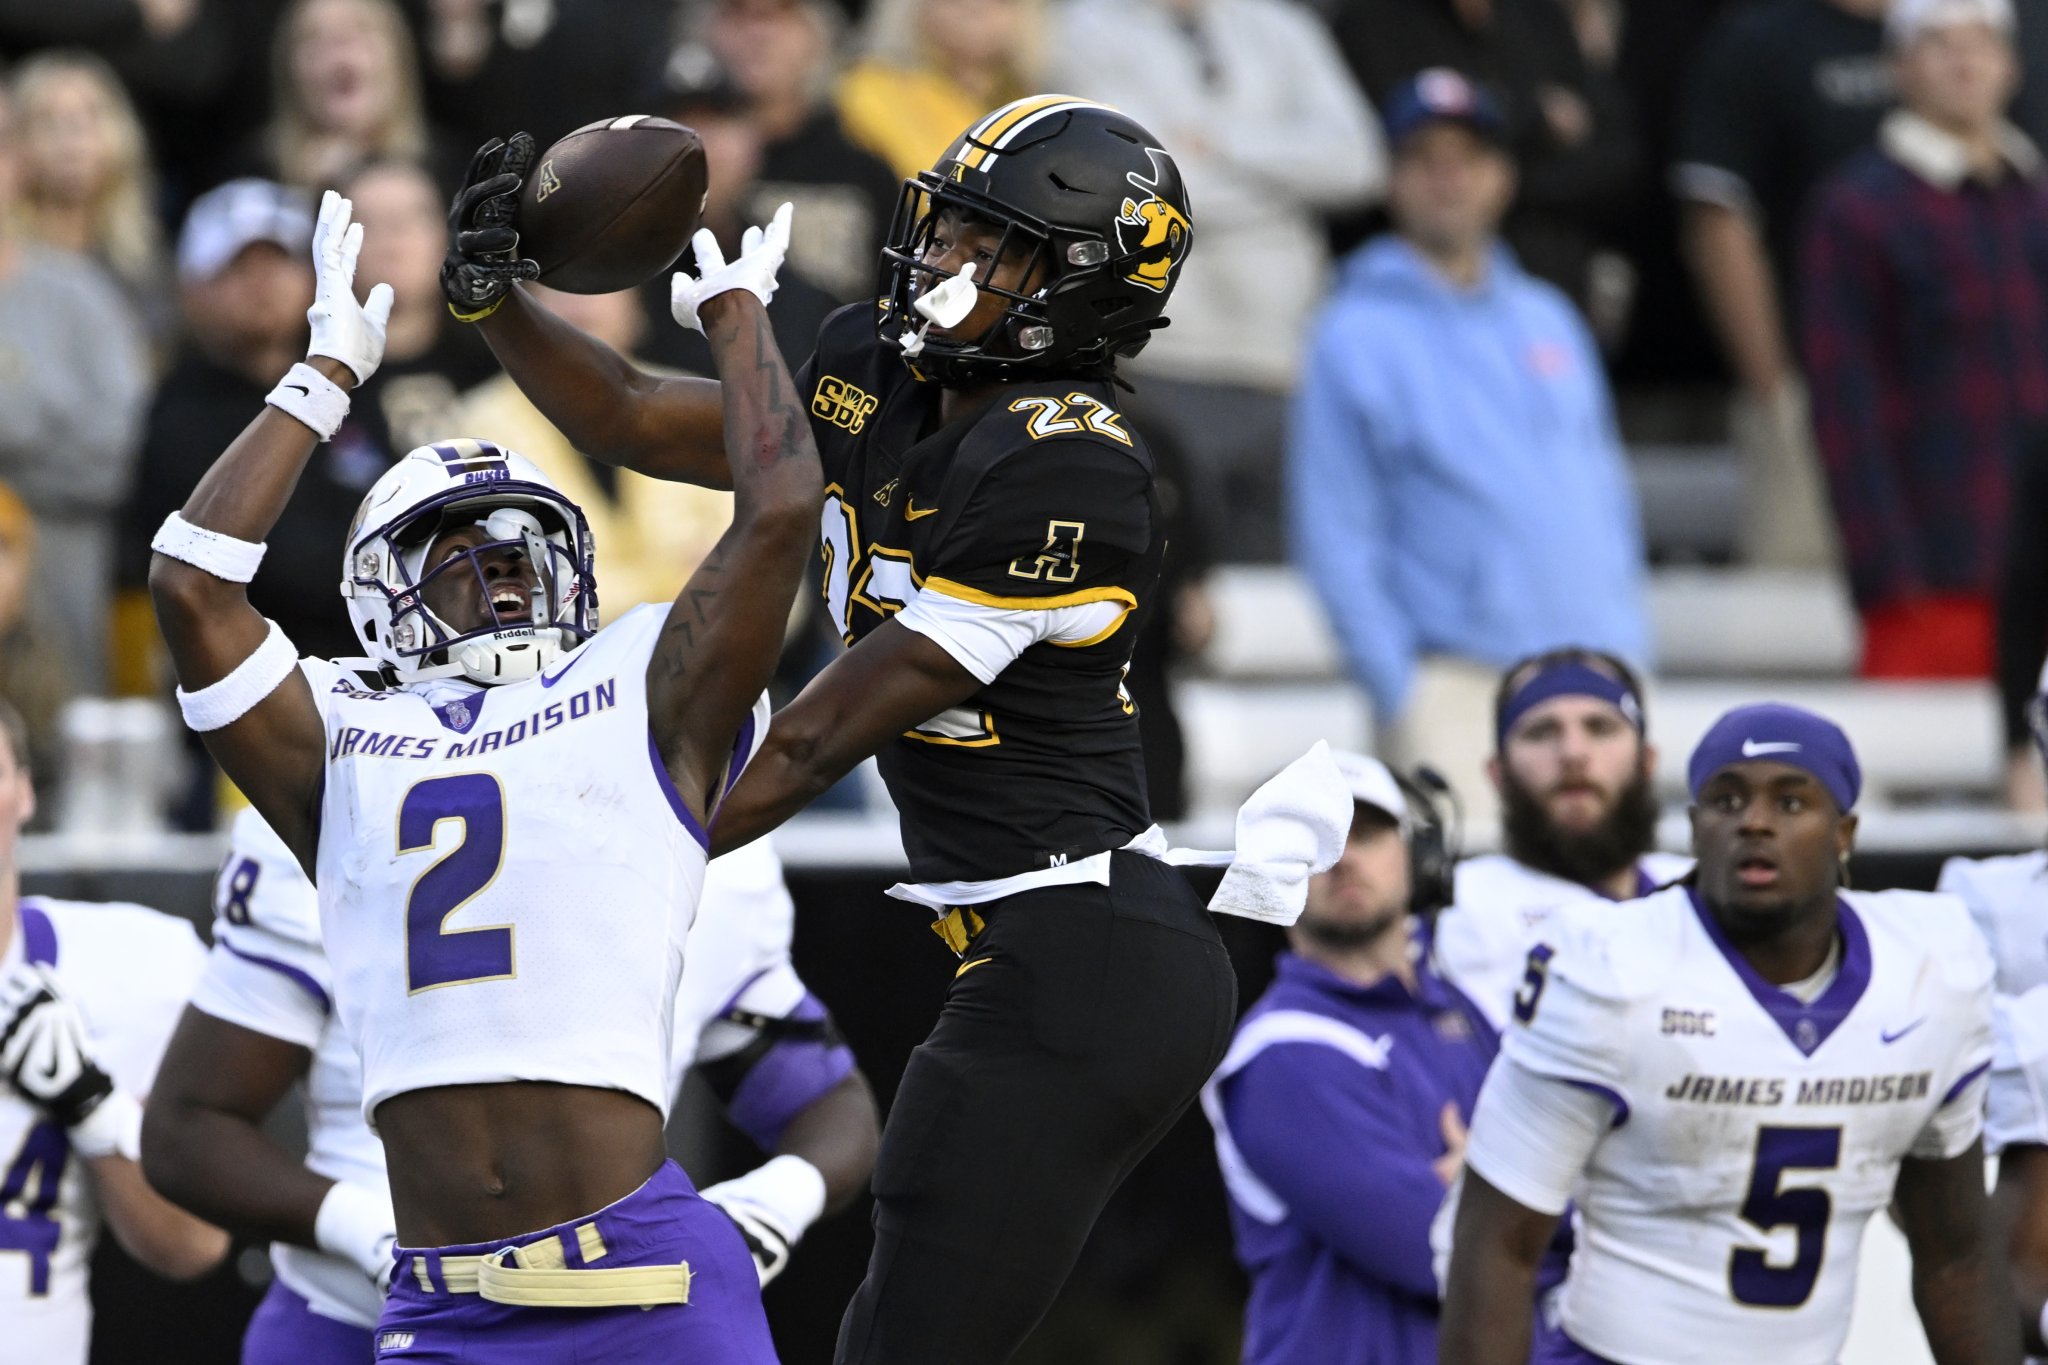 App State blew a 28-3 lead to James Madison, and of course college football fans had jokes